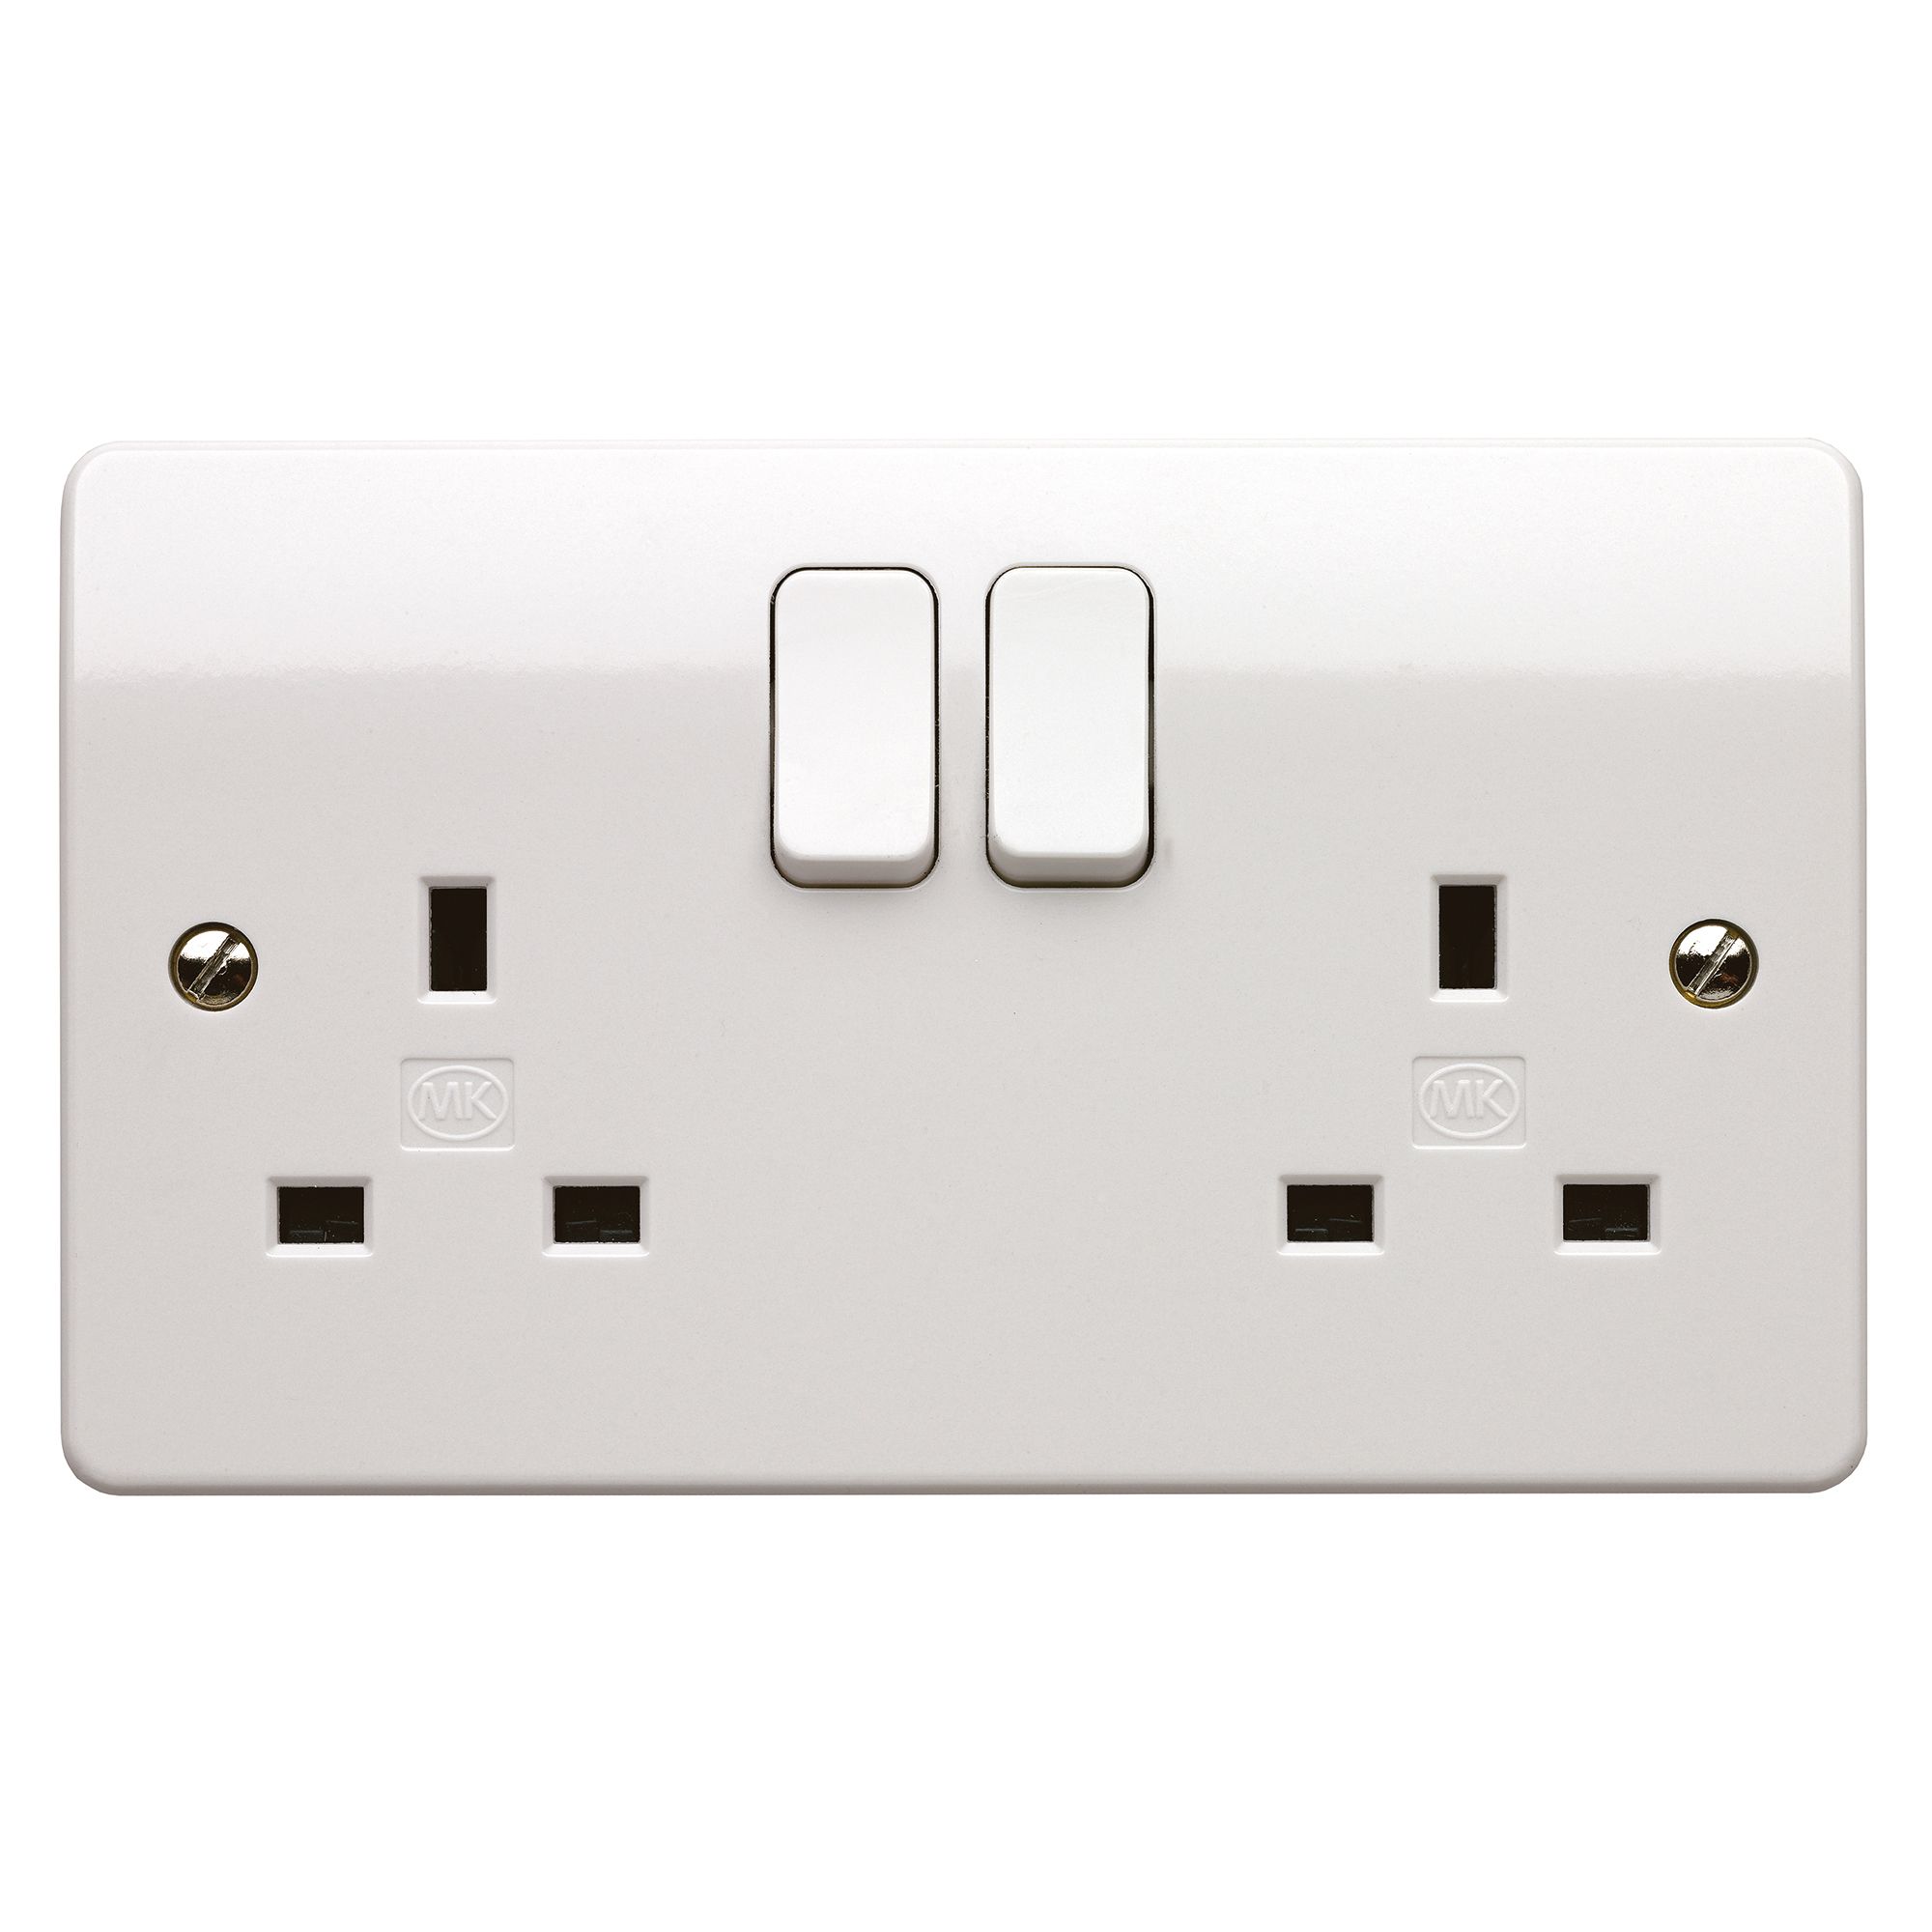 MK Double 13A 240V Gloss White Inboard Socket with 2 poles